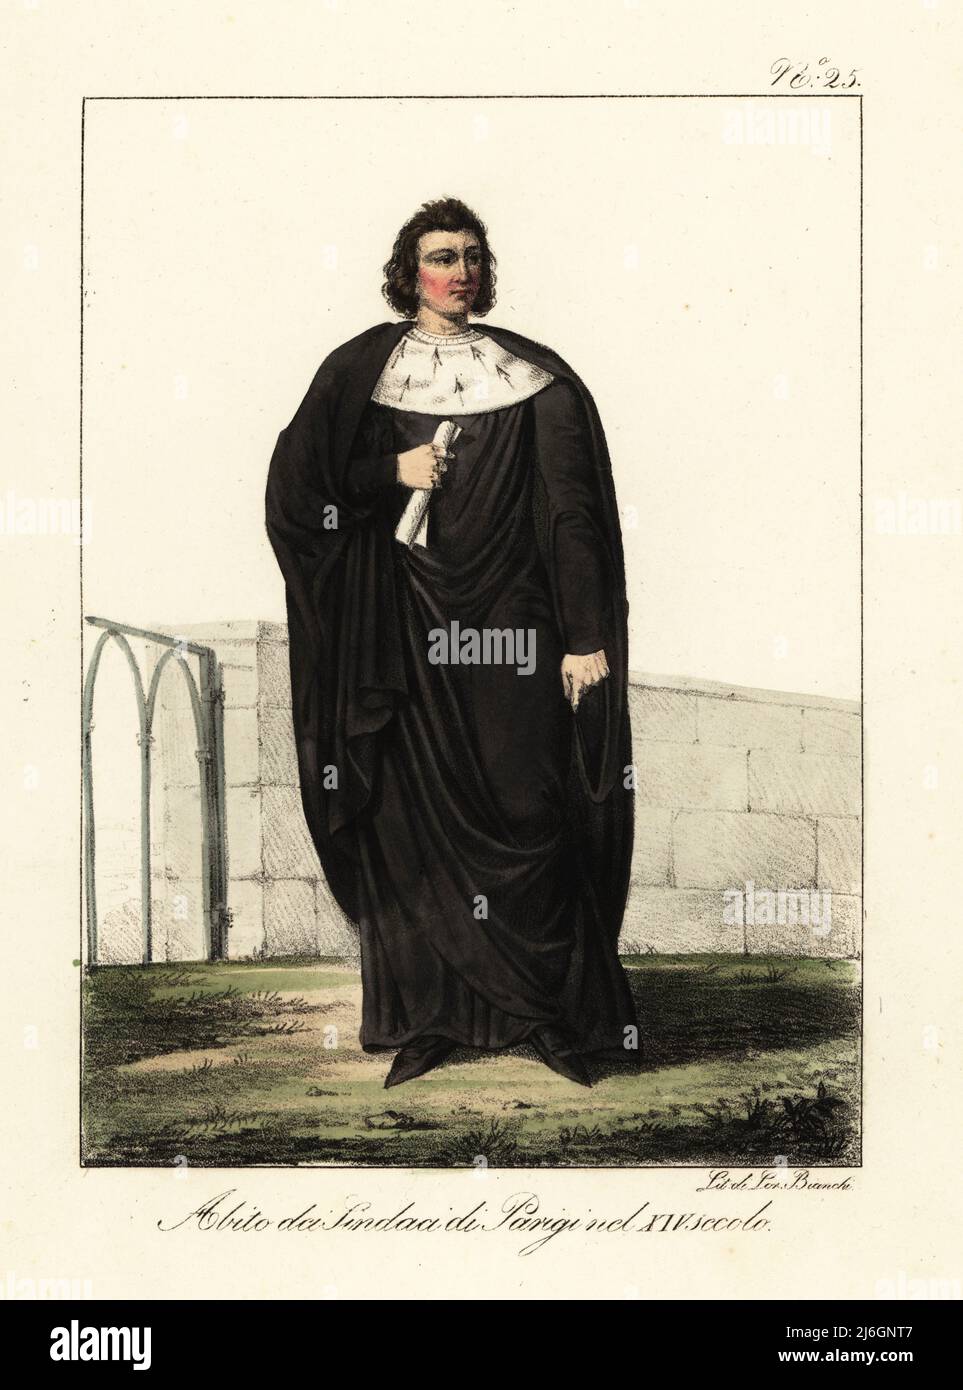 Costume of a mayor of Paris, 14th century. Black mantle over a black robe, broad ermine collar. Costume des Maires de Paris, pendant le 14th siècle. Handcoloured lithograph by Lorenzo Bianchi after Hippolyte Lecomte from Costumi civili e militari della monarchia francese dal 1200 al 1820, Naples, 1825. Italian edition of Lecomte’s Civilian and military costumes of the French monarchy from 1200 to 1820. Stock Photo